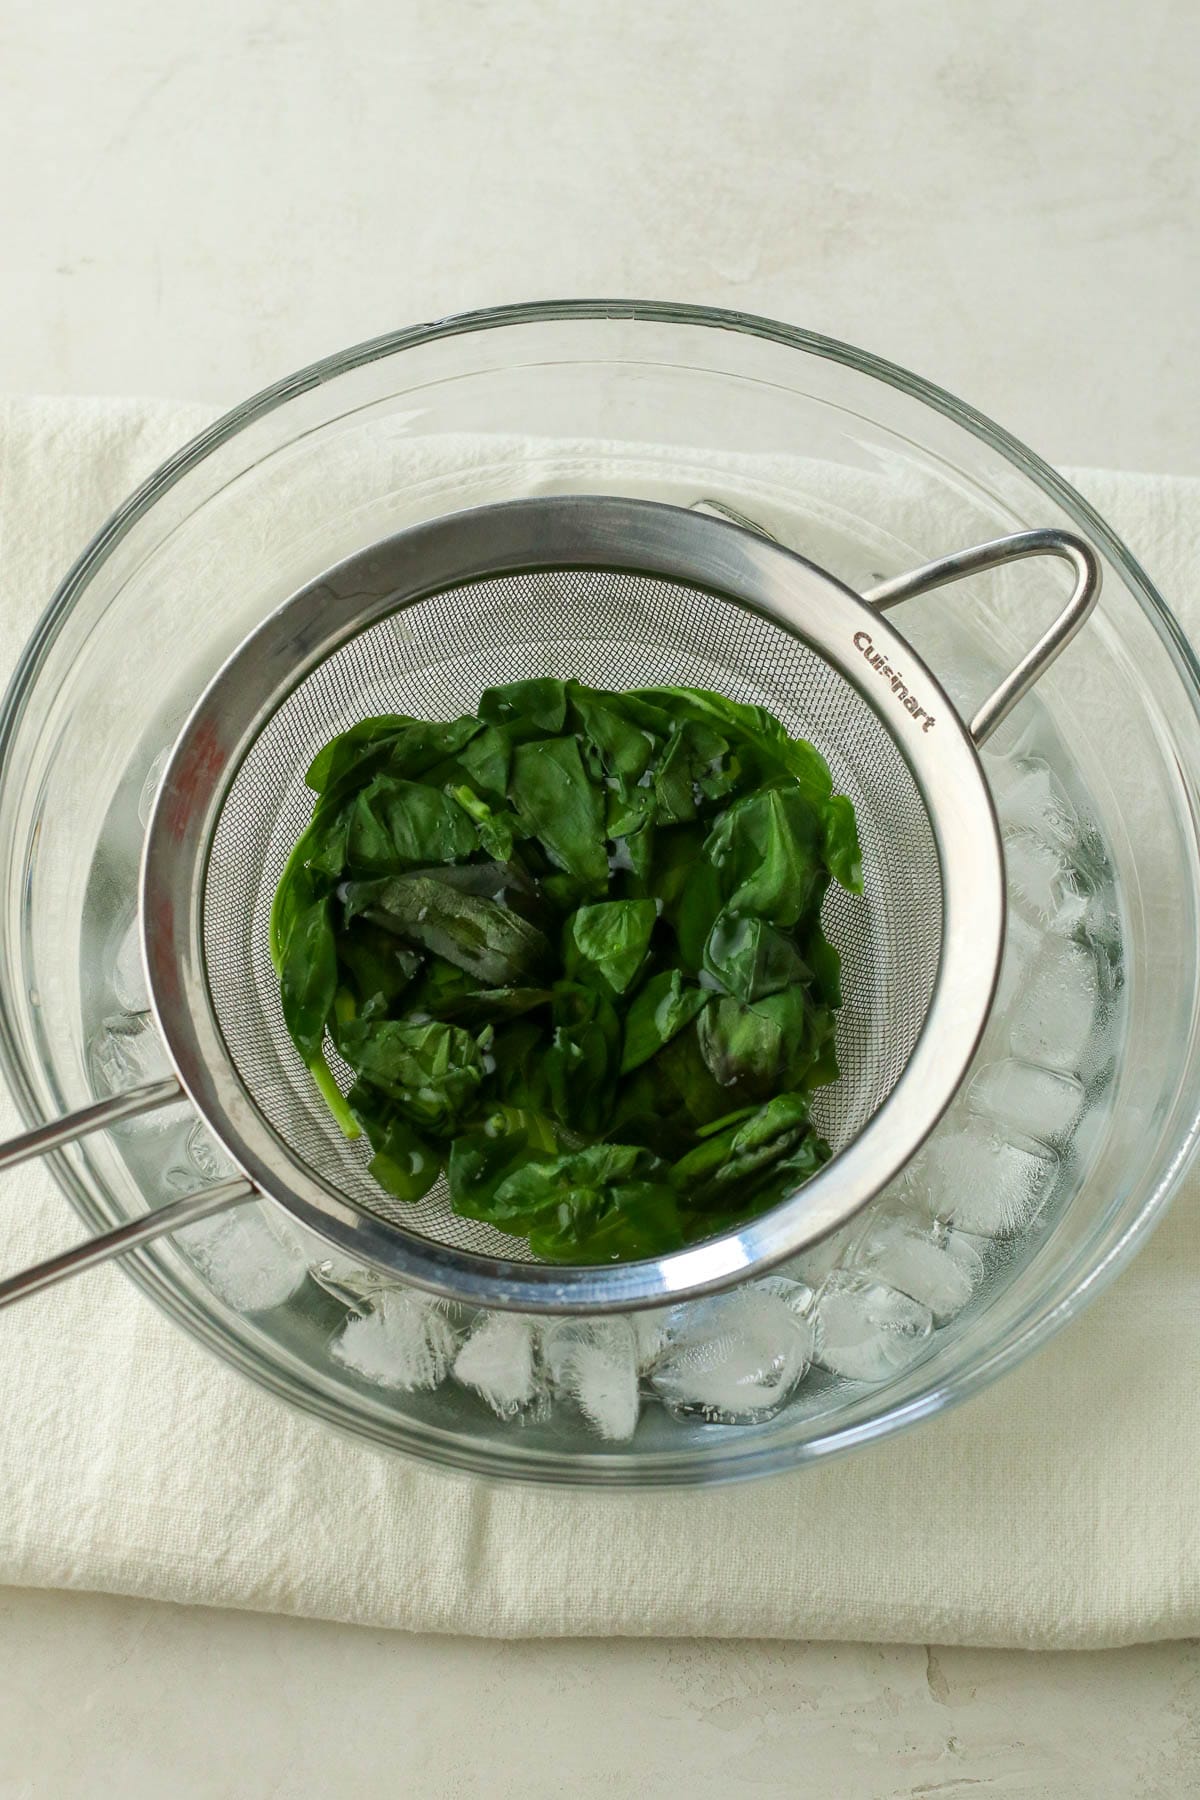 cooked basil going into ice bath.